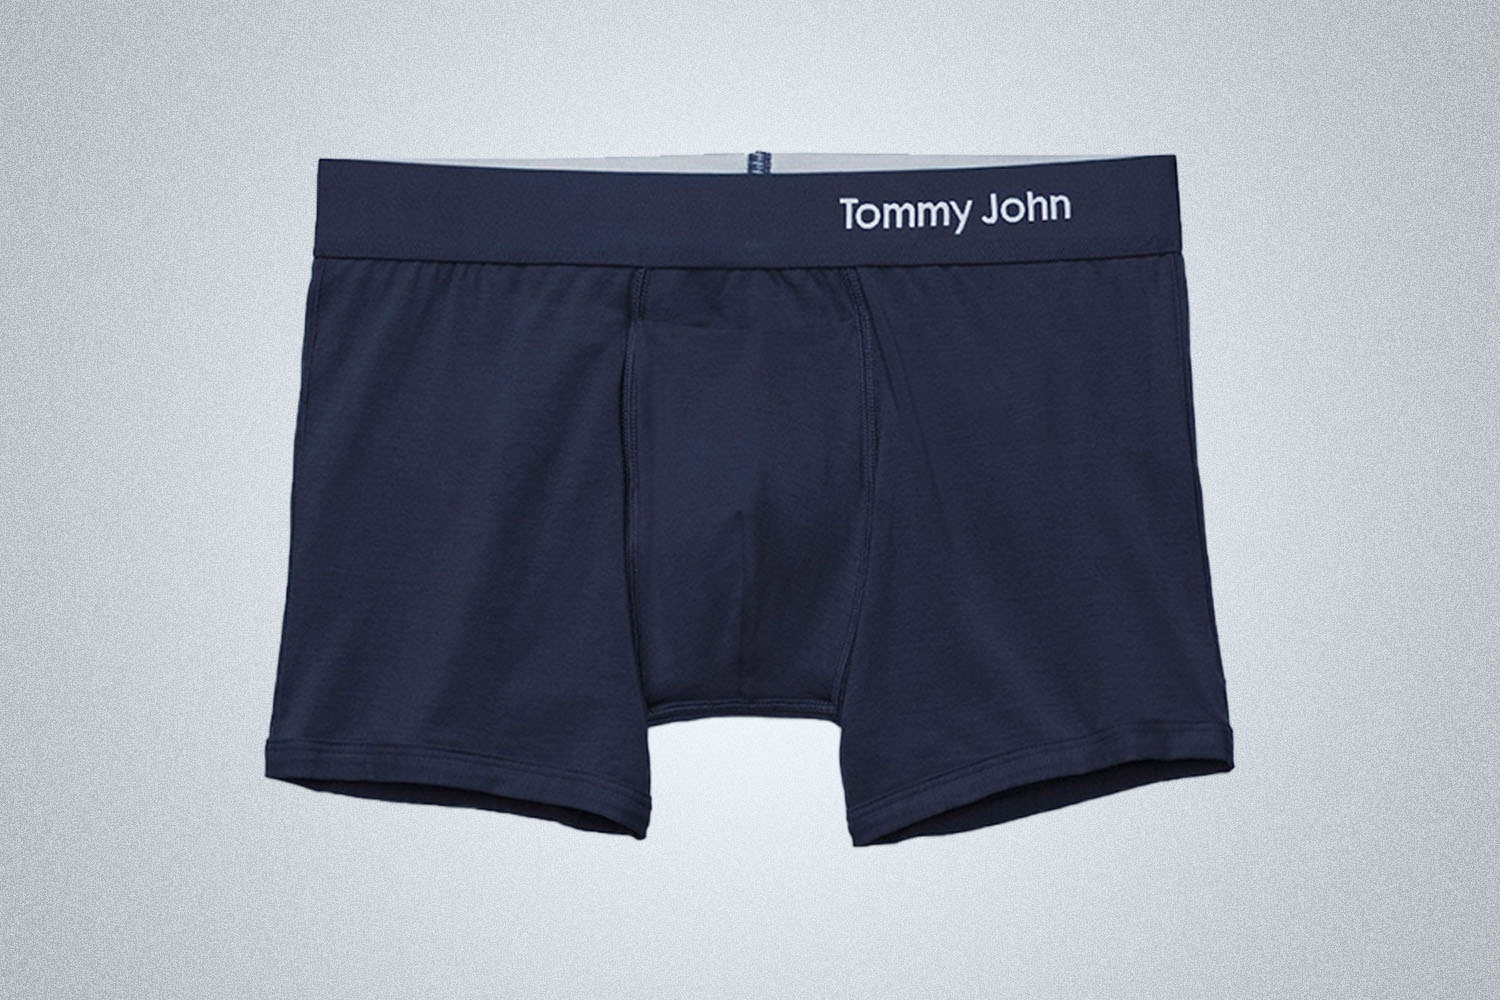 a pair of blue underwear from Tommy John on a grey background